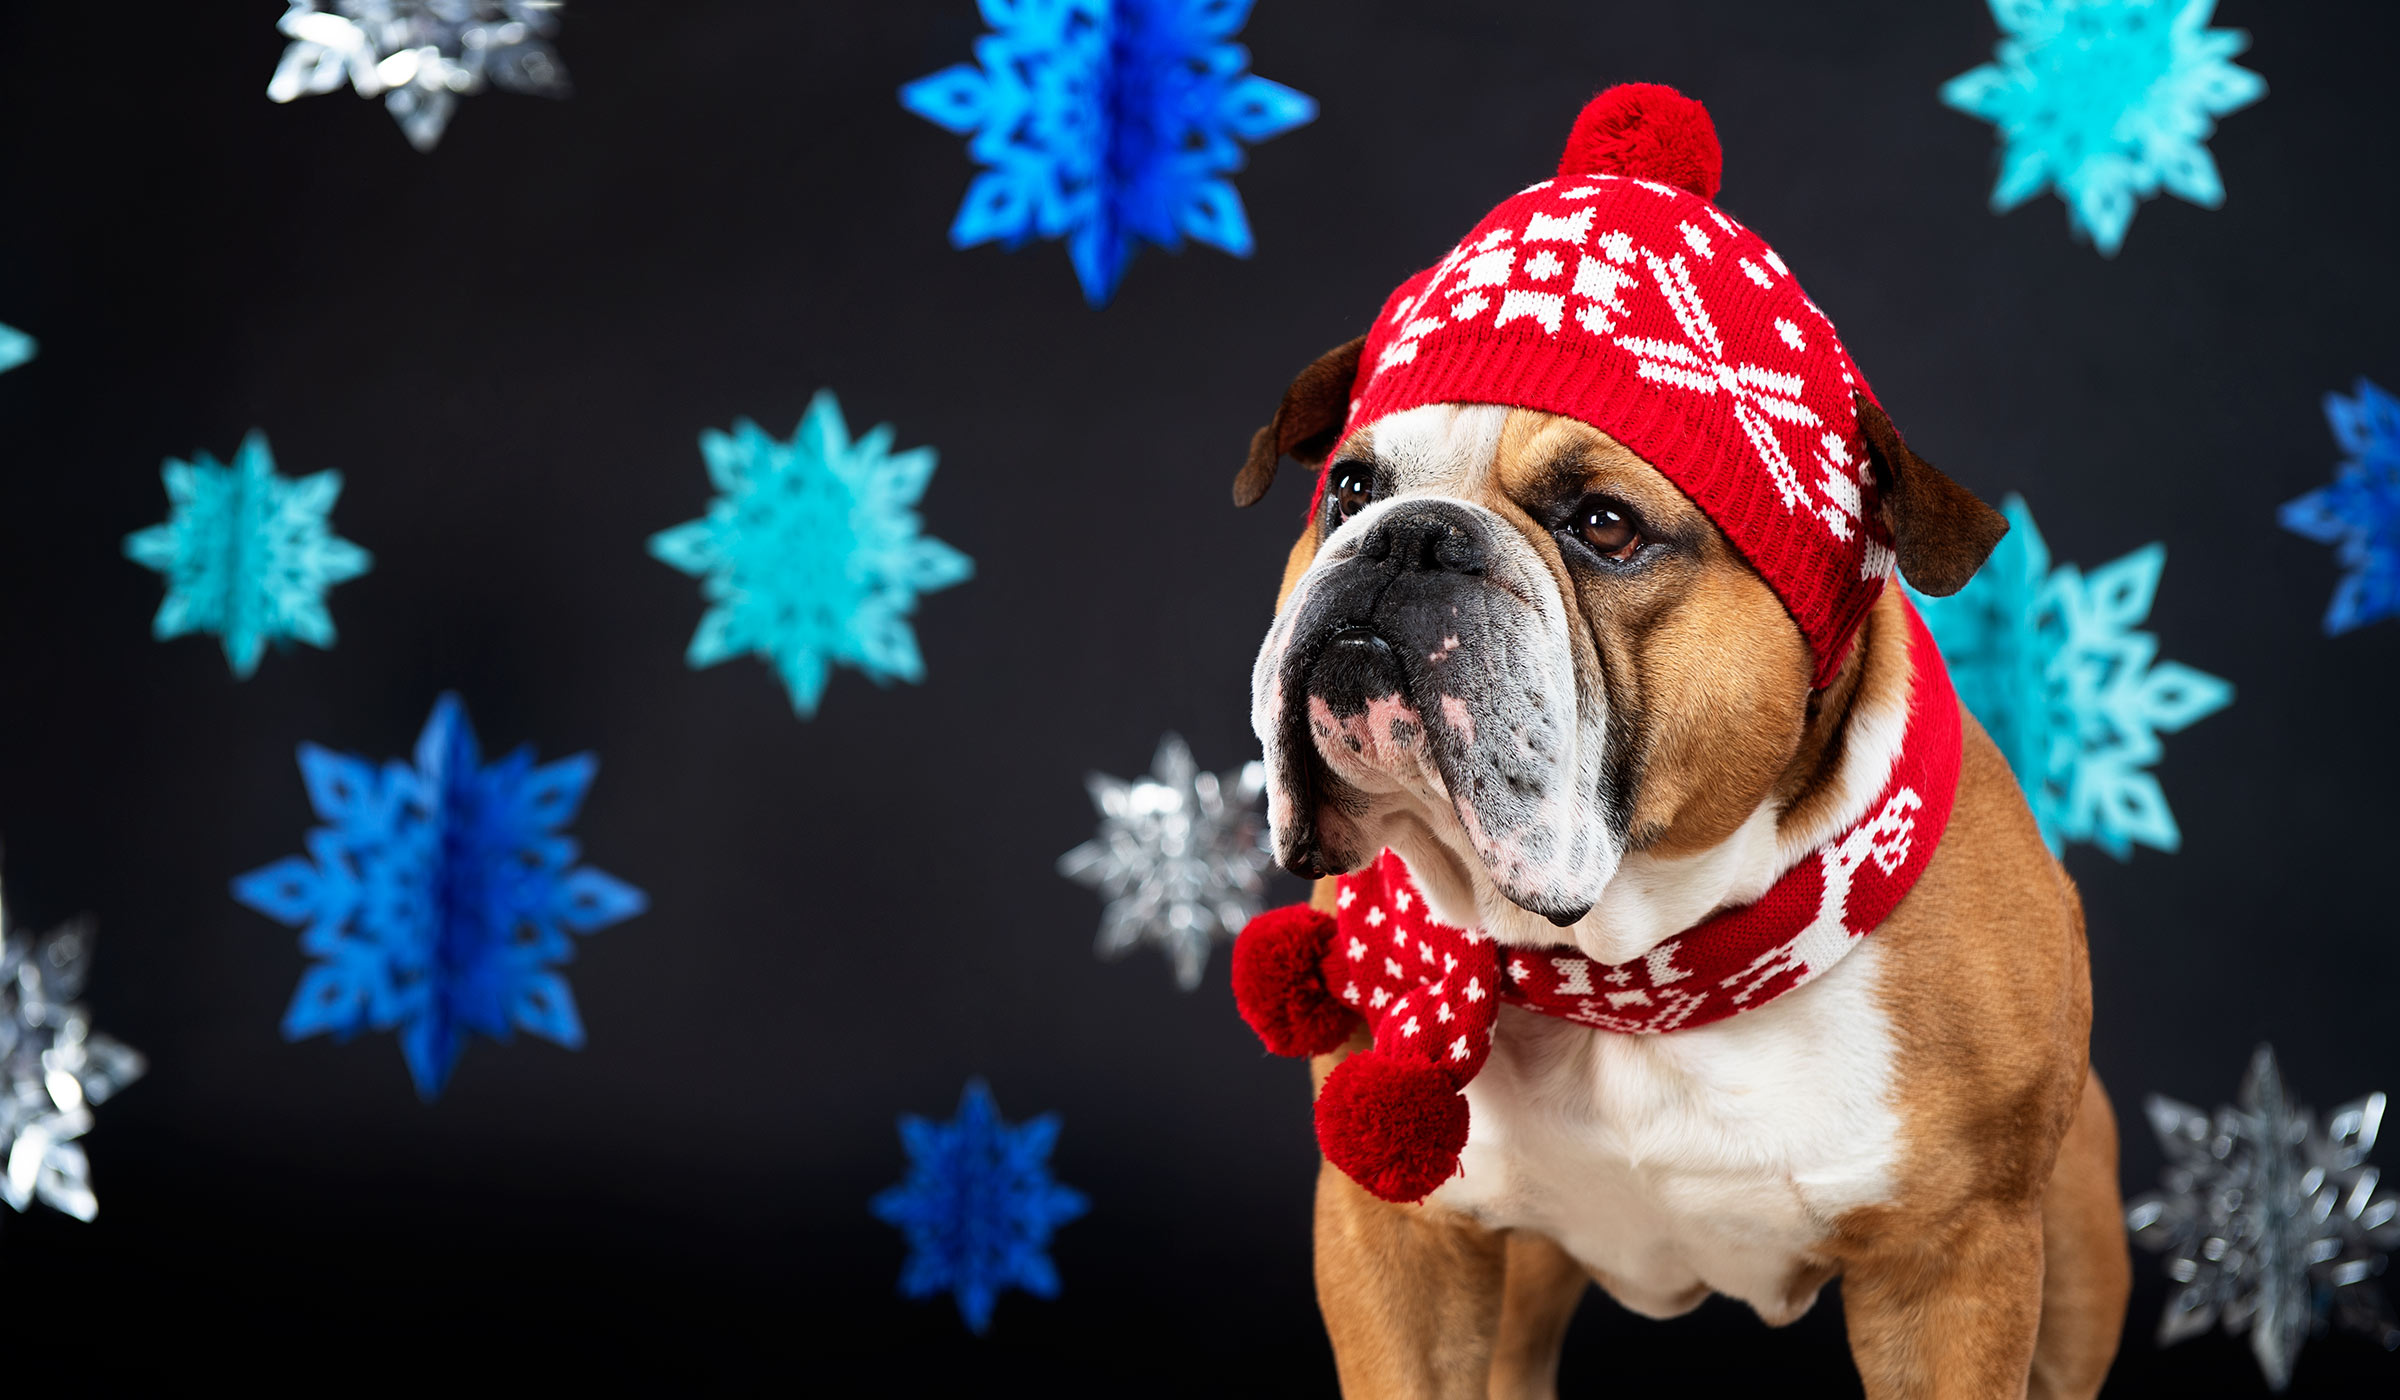 Bulldog wearing red and white toboggan hat in front of blue, teal, and silver paper snowflakes.